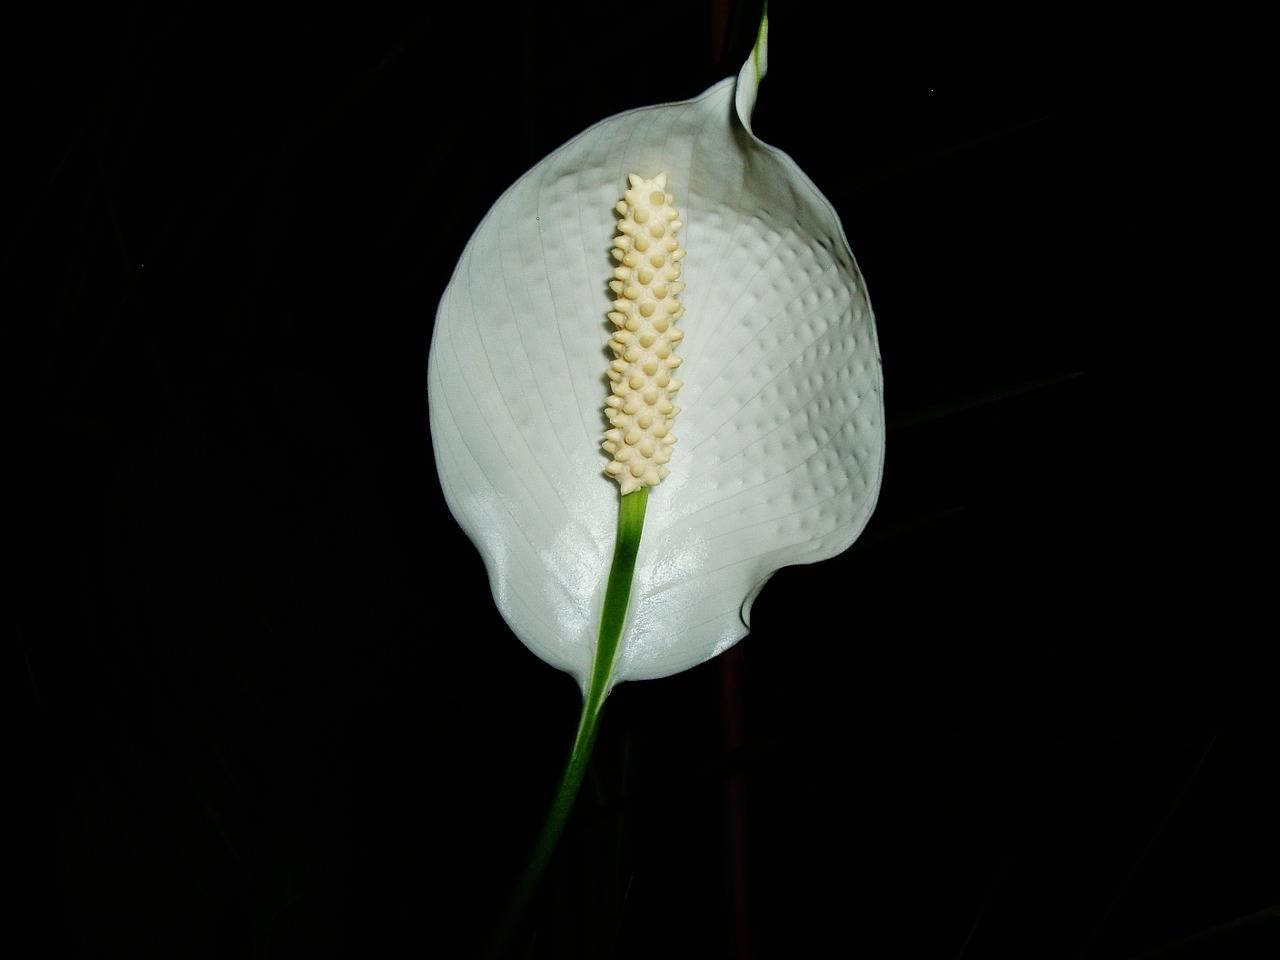 Home care for spathiphyllum